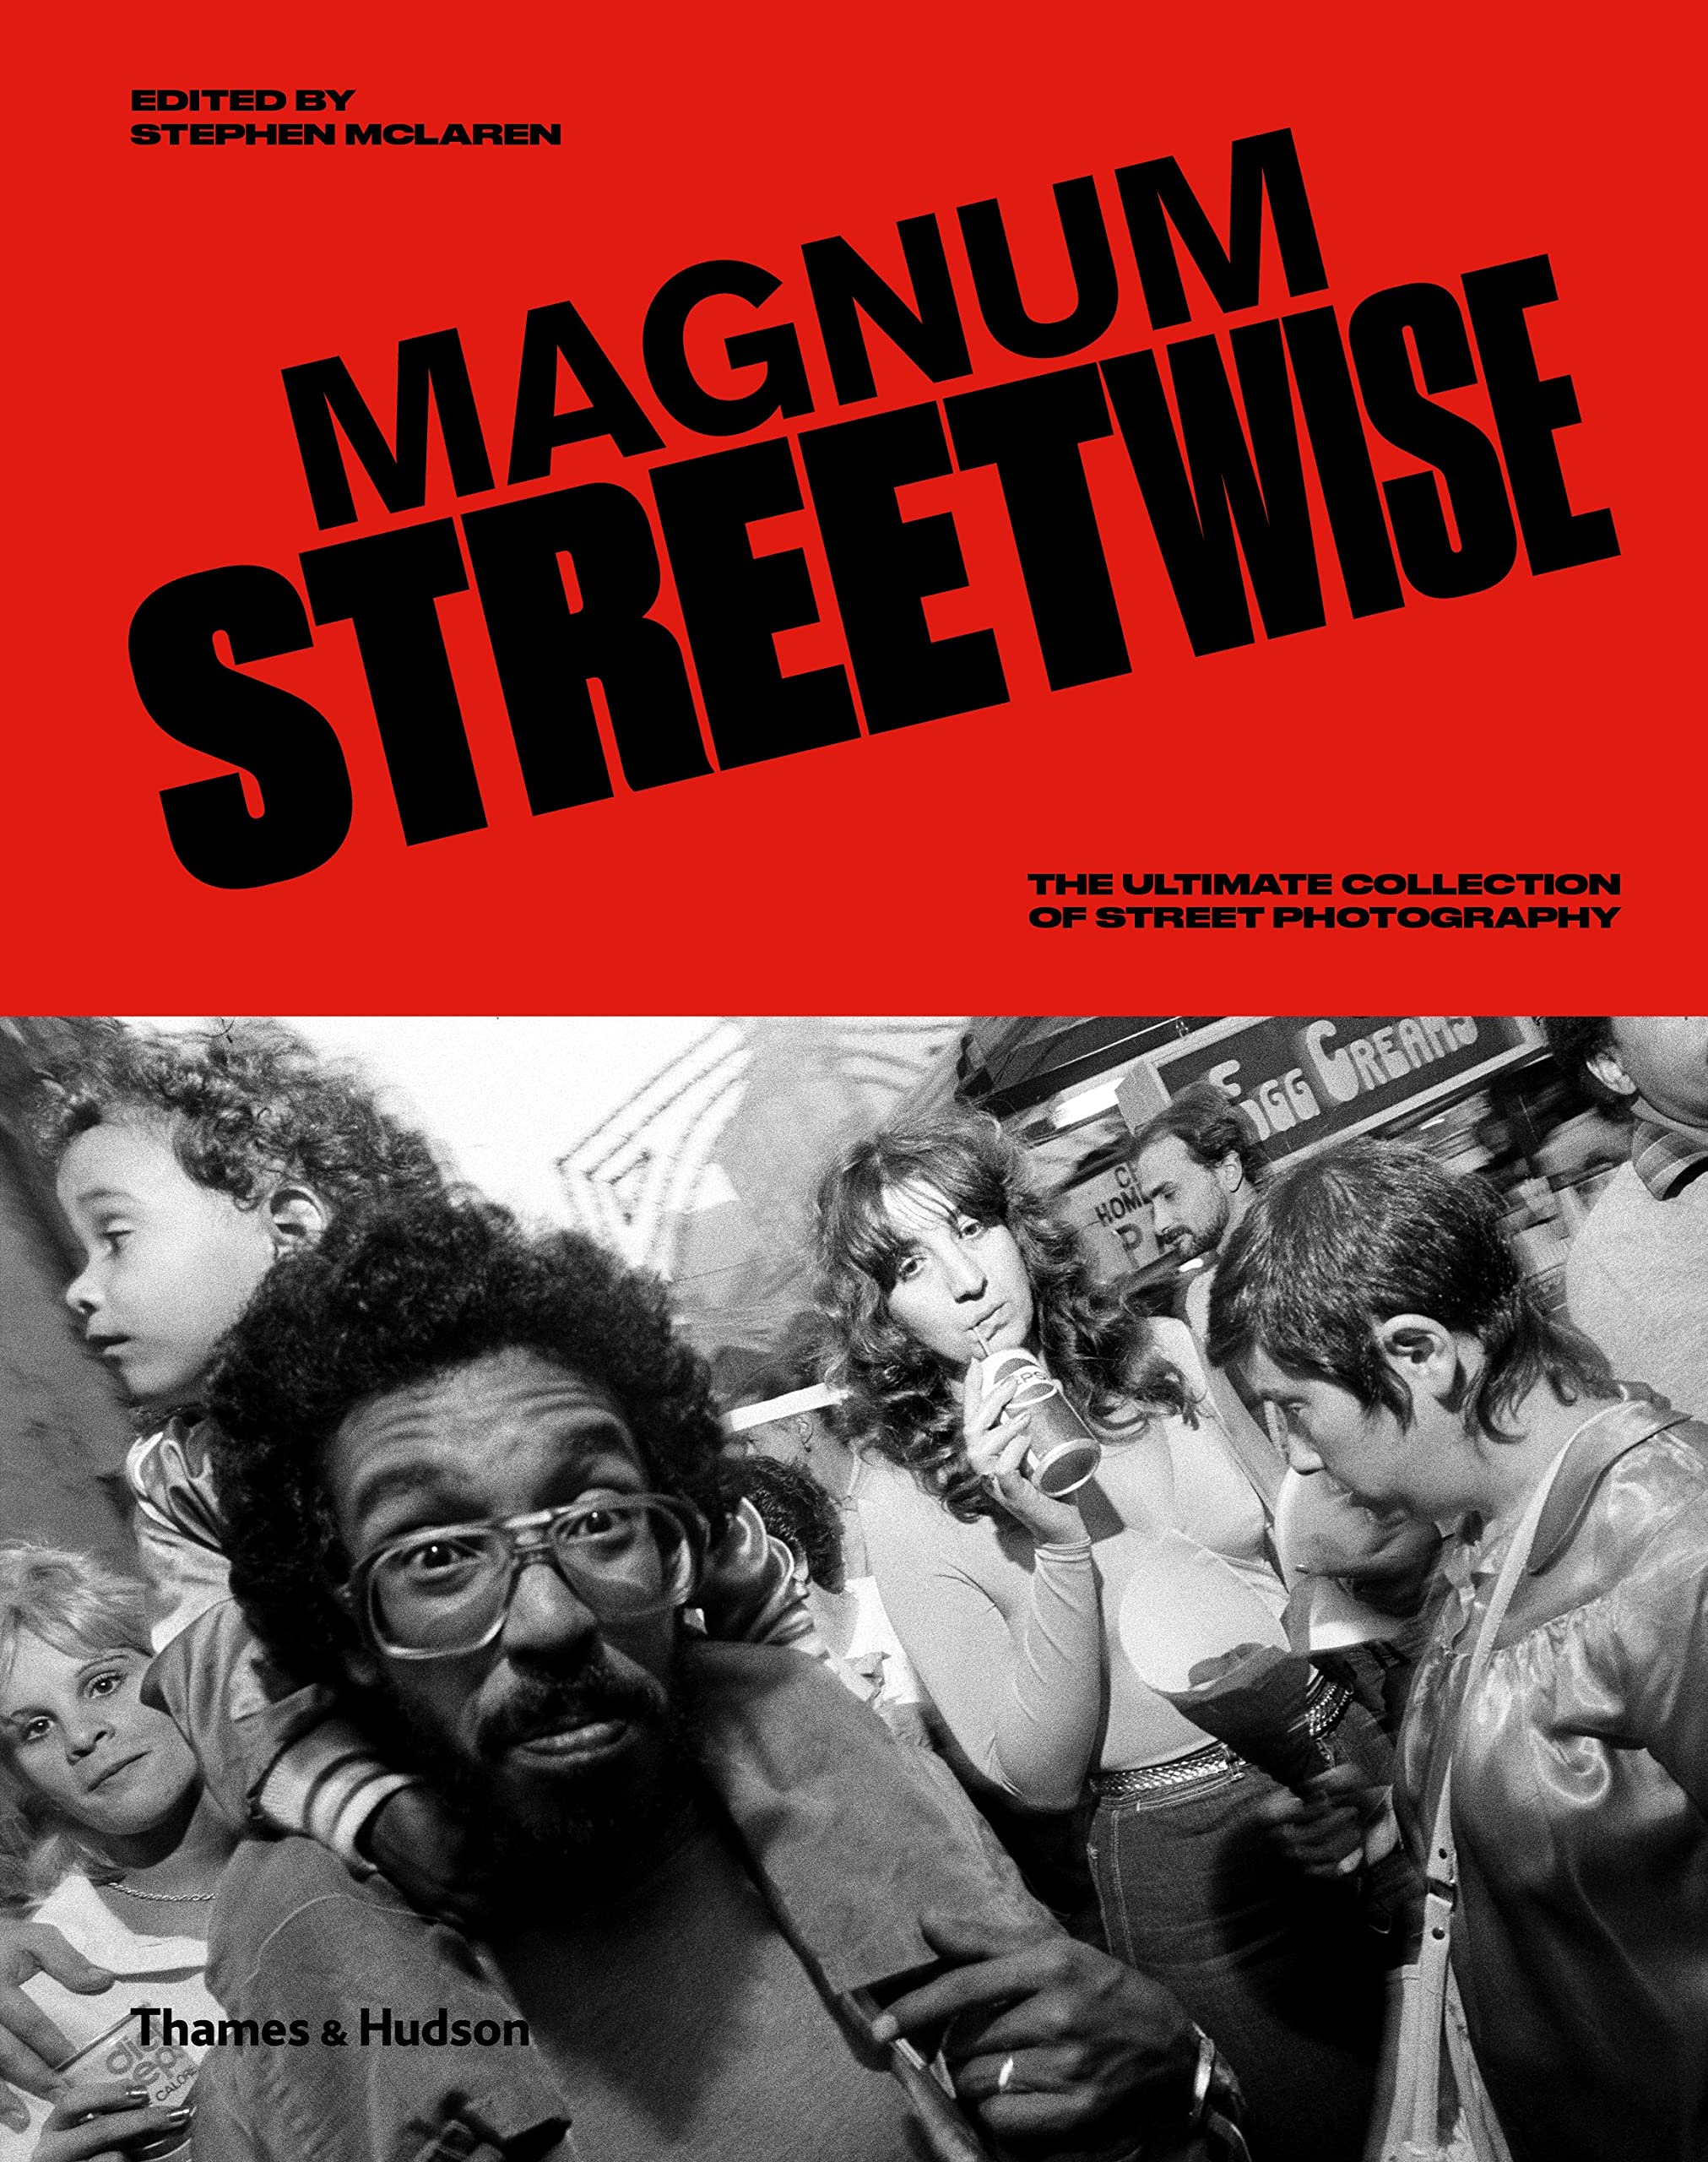 Magnum Streetwise : The Ultimate Collection of Street Photography (Hardcover)